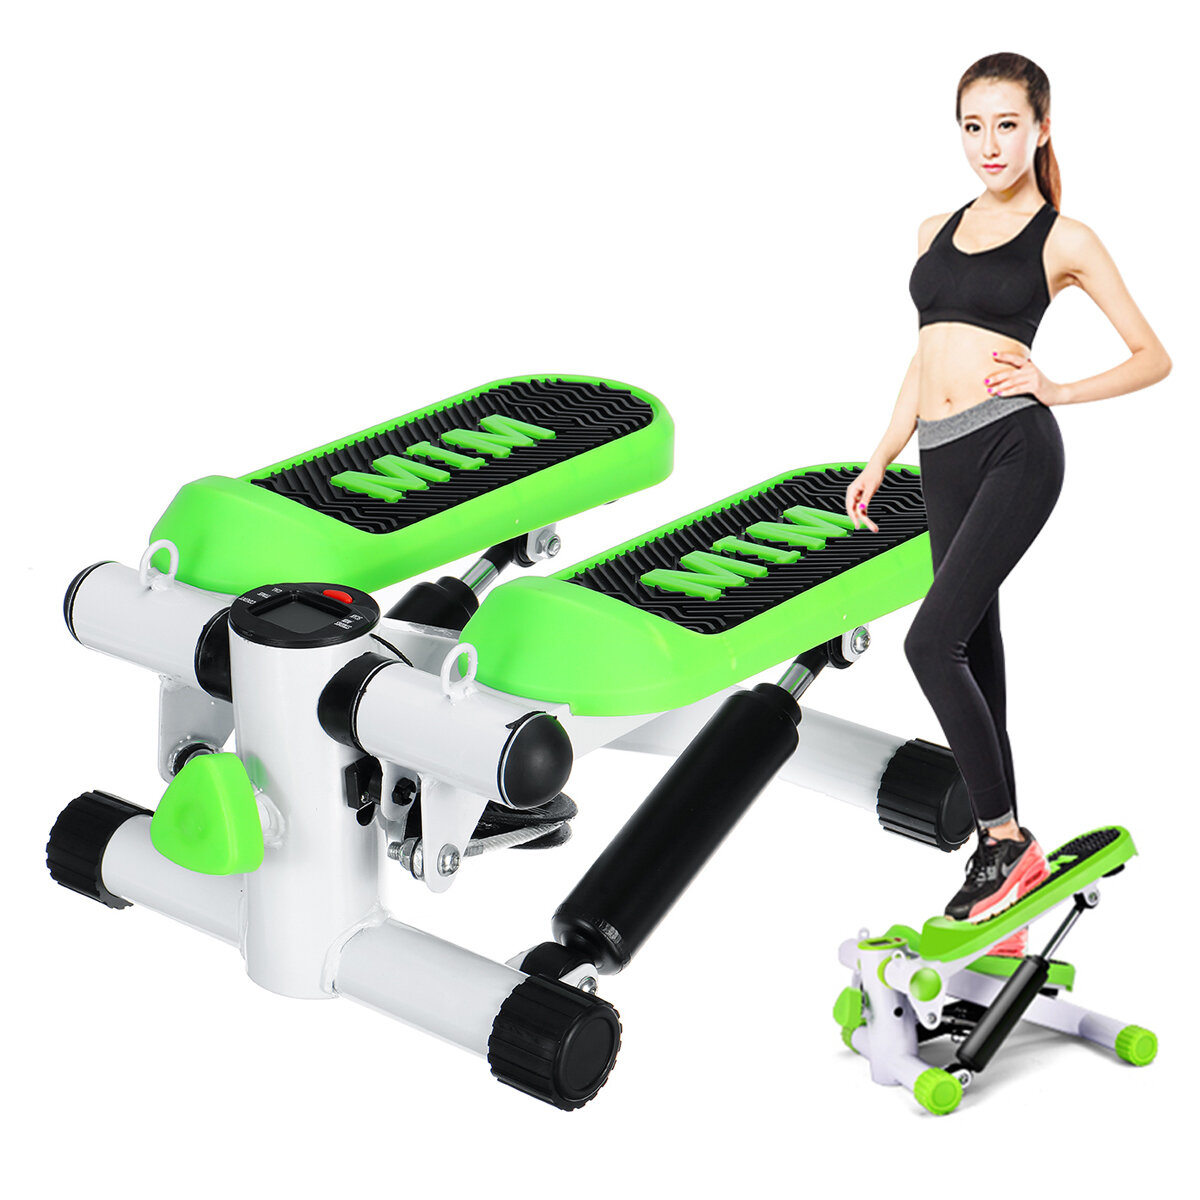 Cardio Fitness Stepper Multifunctional Treadmill Leg Waist Exercise Machine Gym Home Sports Cycling 